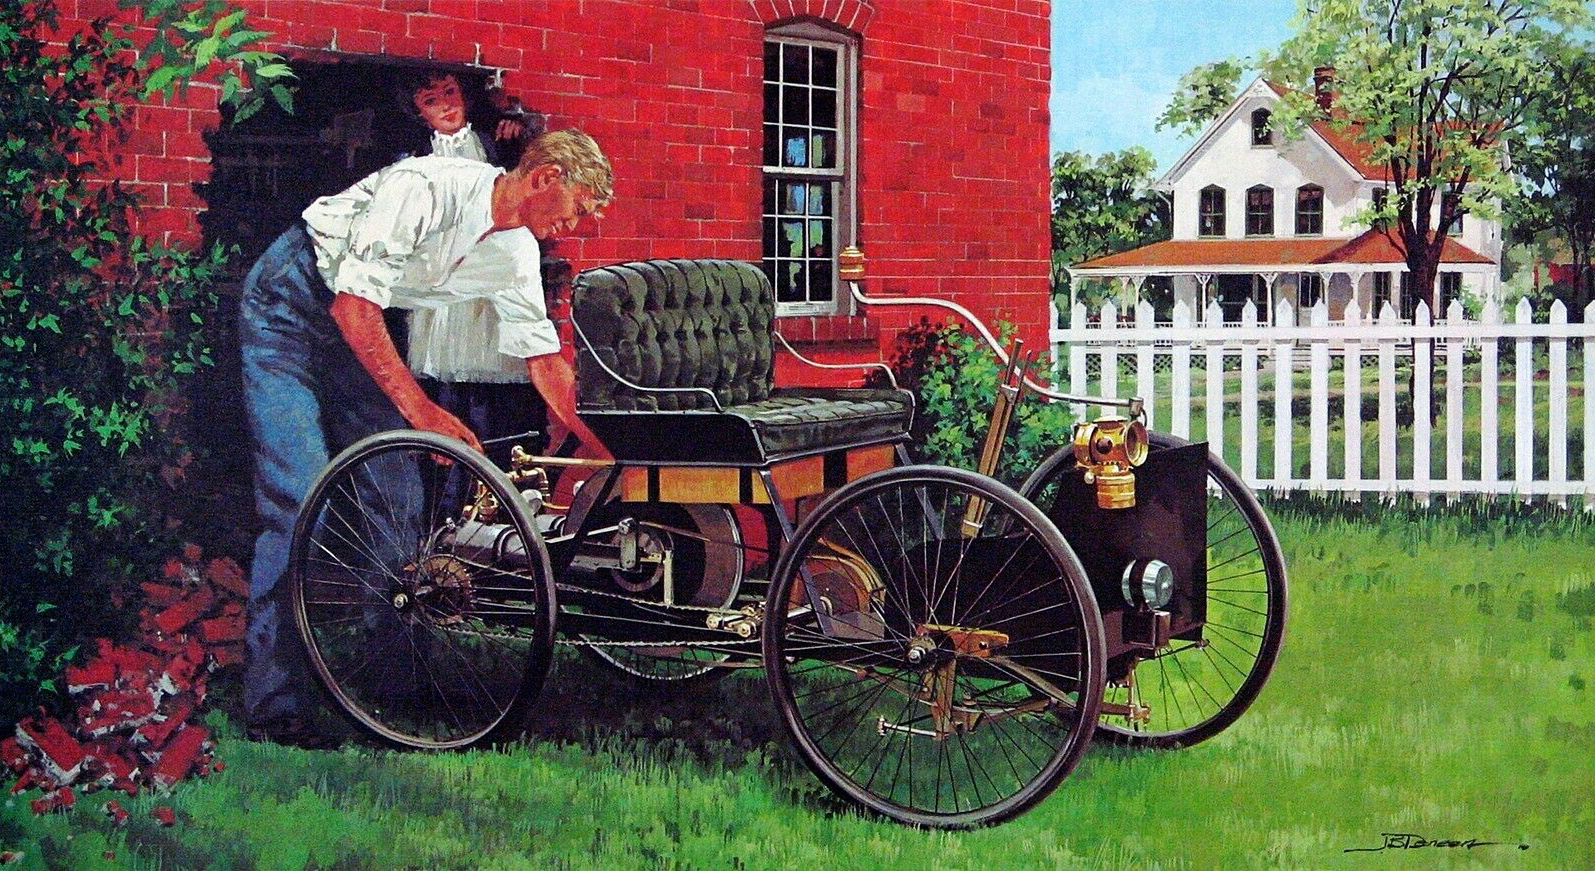 1896. Quadricycle. Illustrated by James B. Deneen